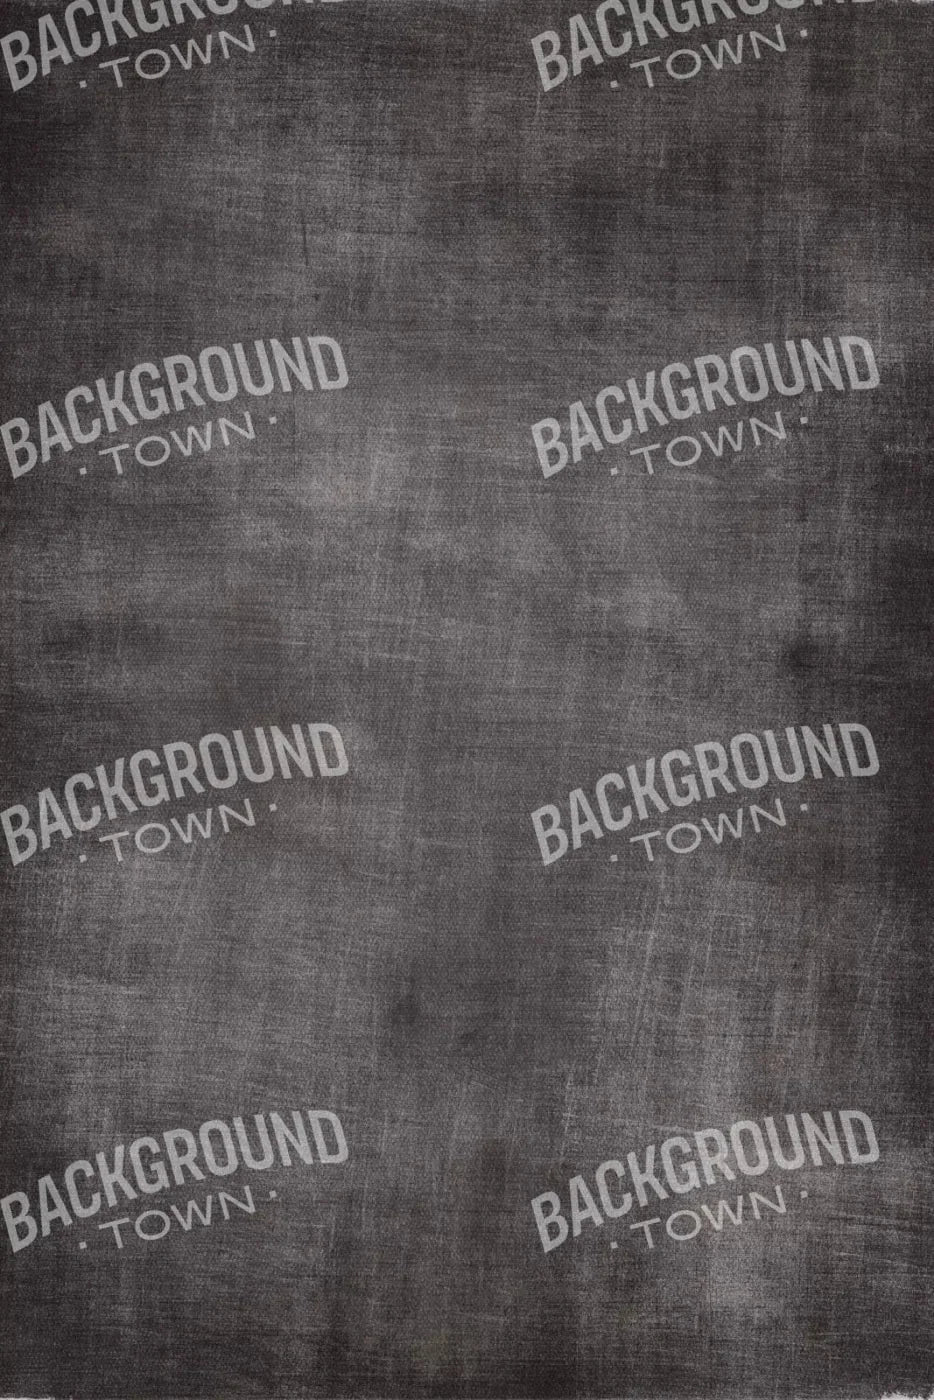 Blackboard For Lvl Up Backdrop System 5X76 Up ( 60 X 90 Inch )